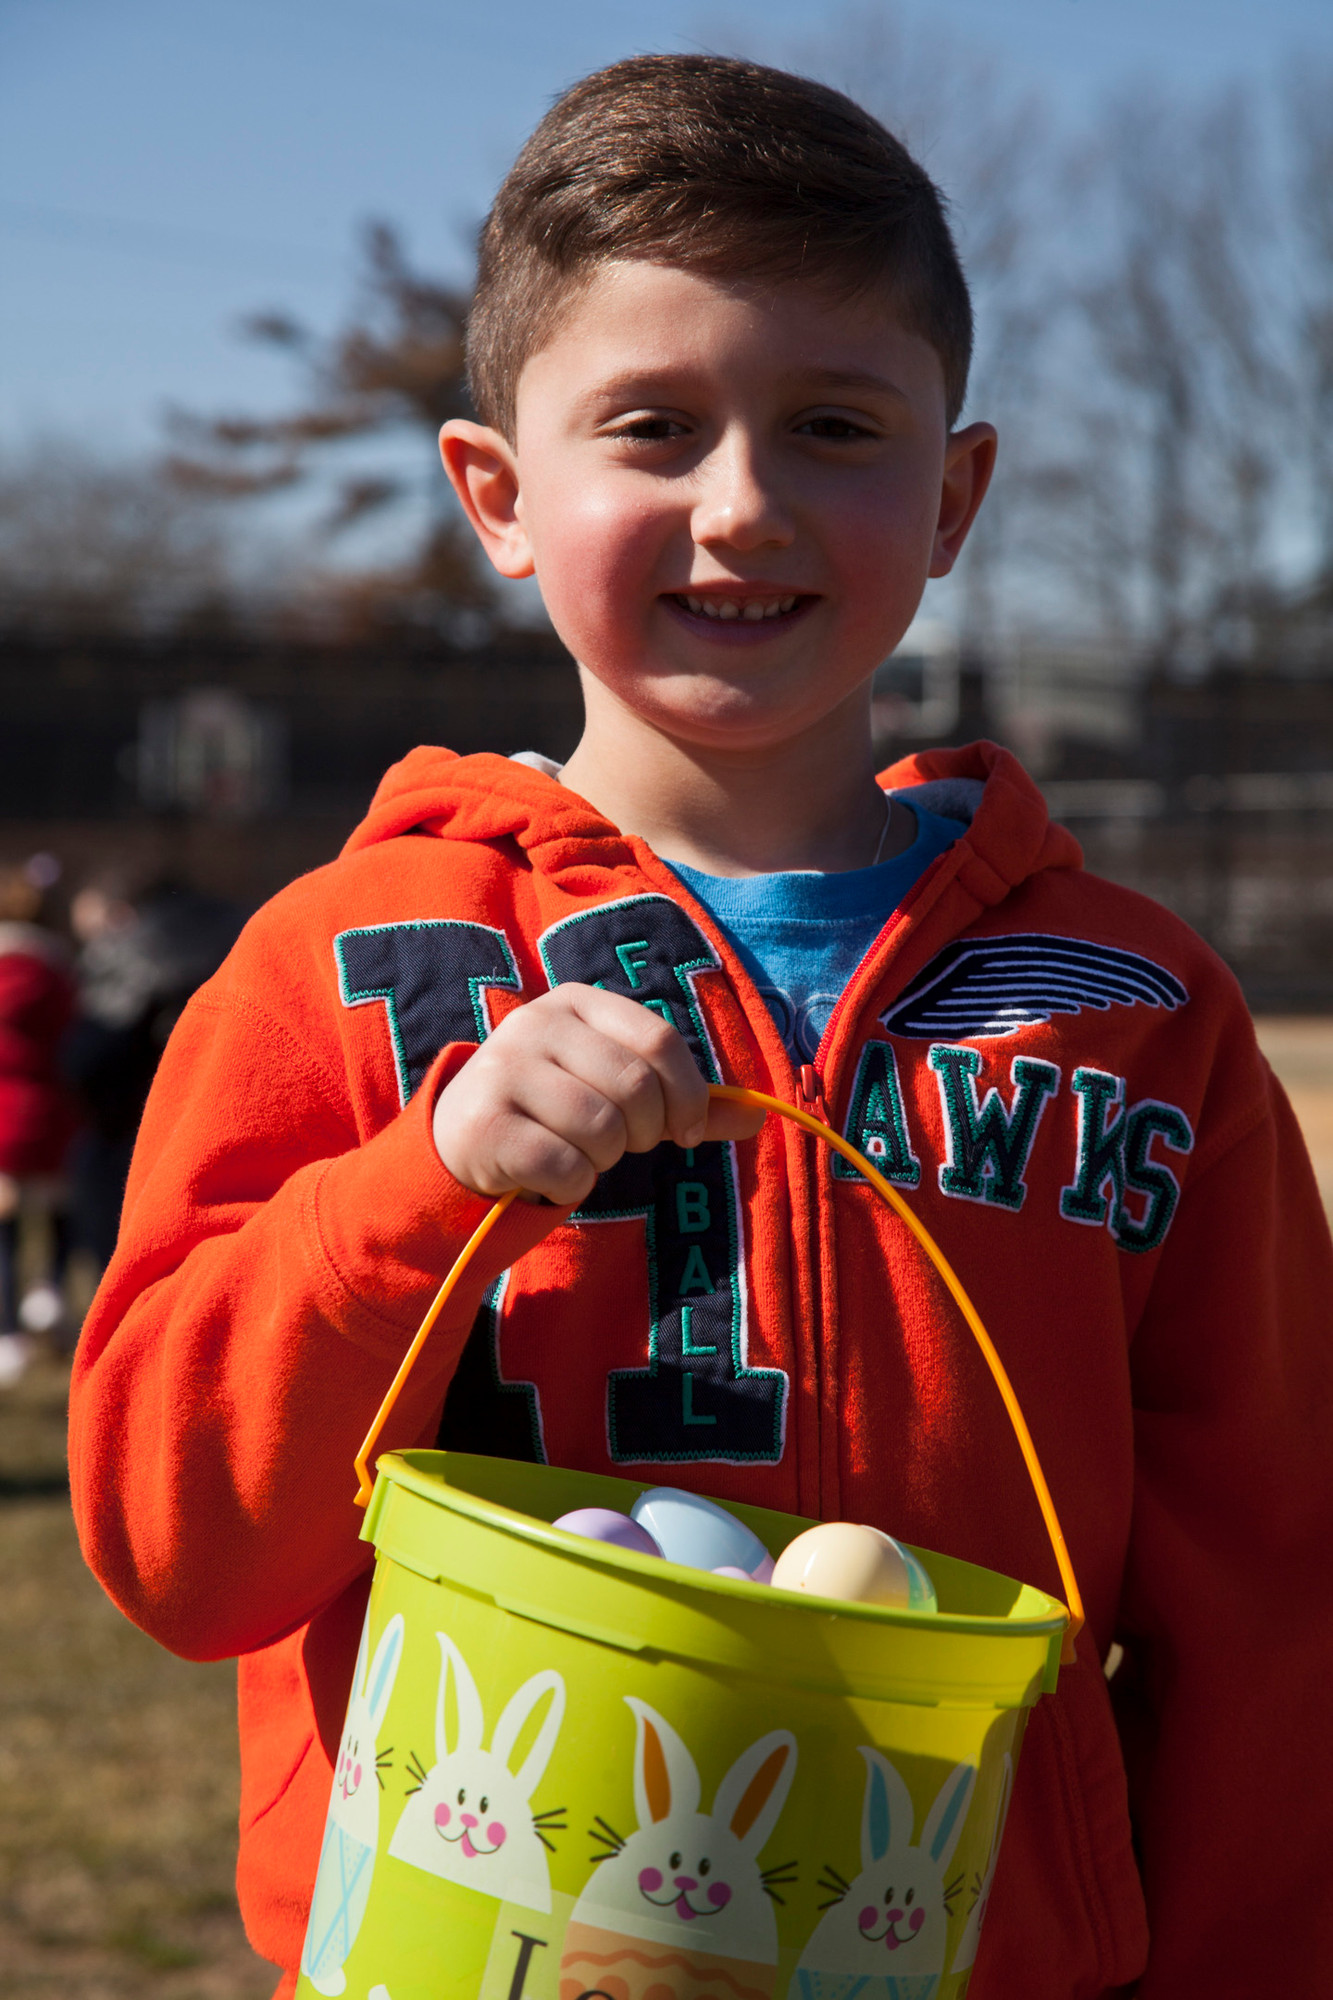 LOGAN FINK, 5, showed all of the eggs that he collected after the hunt.